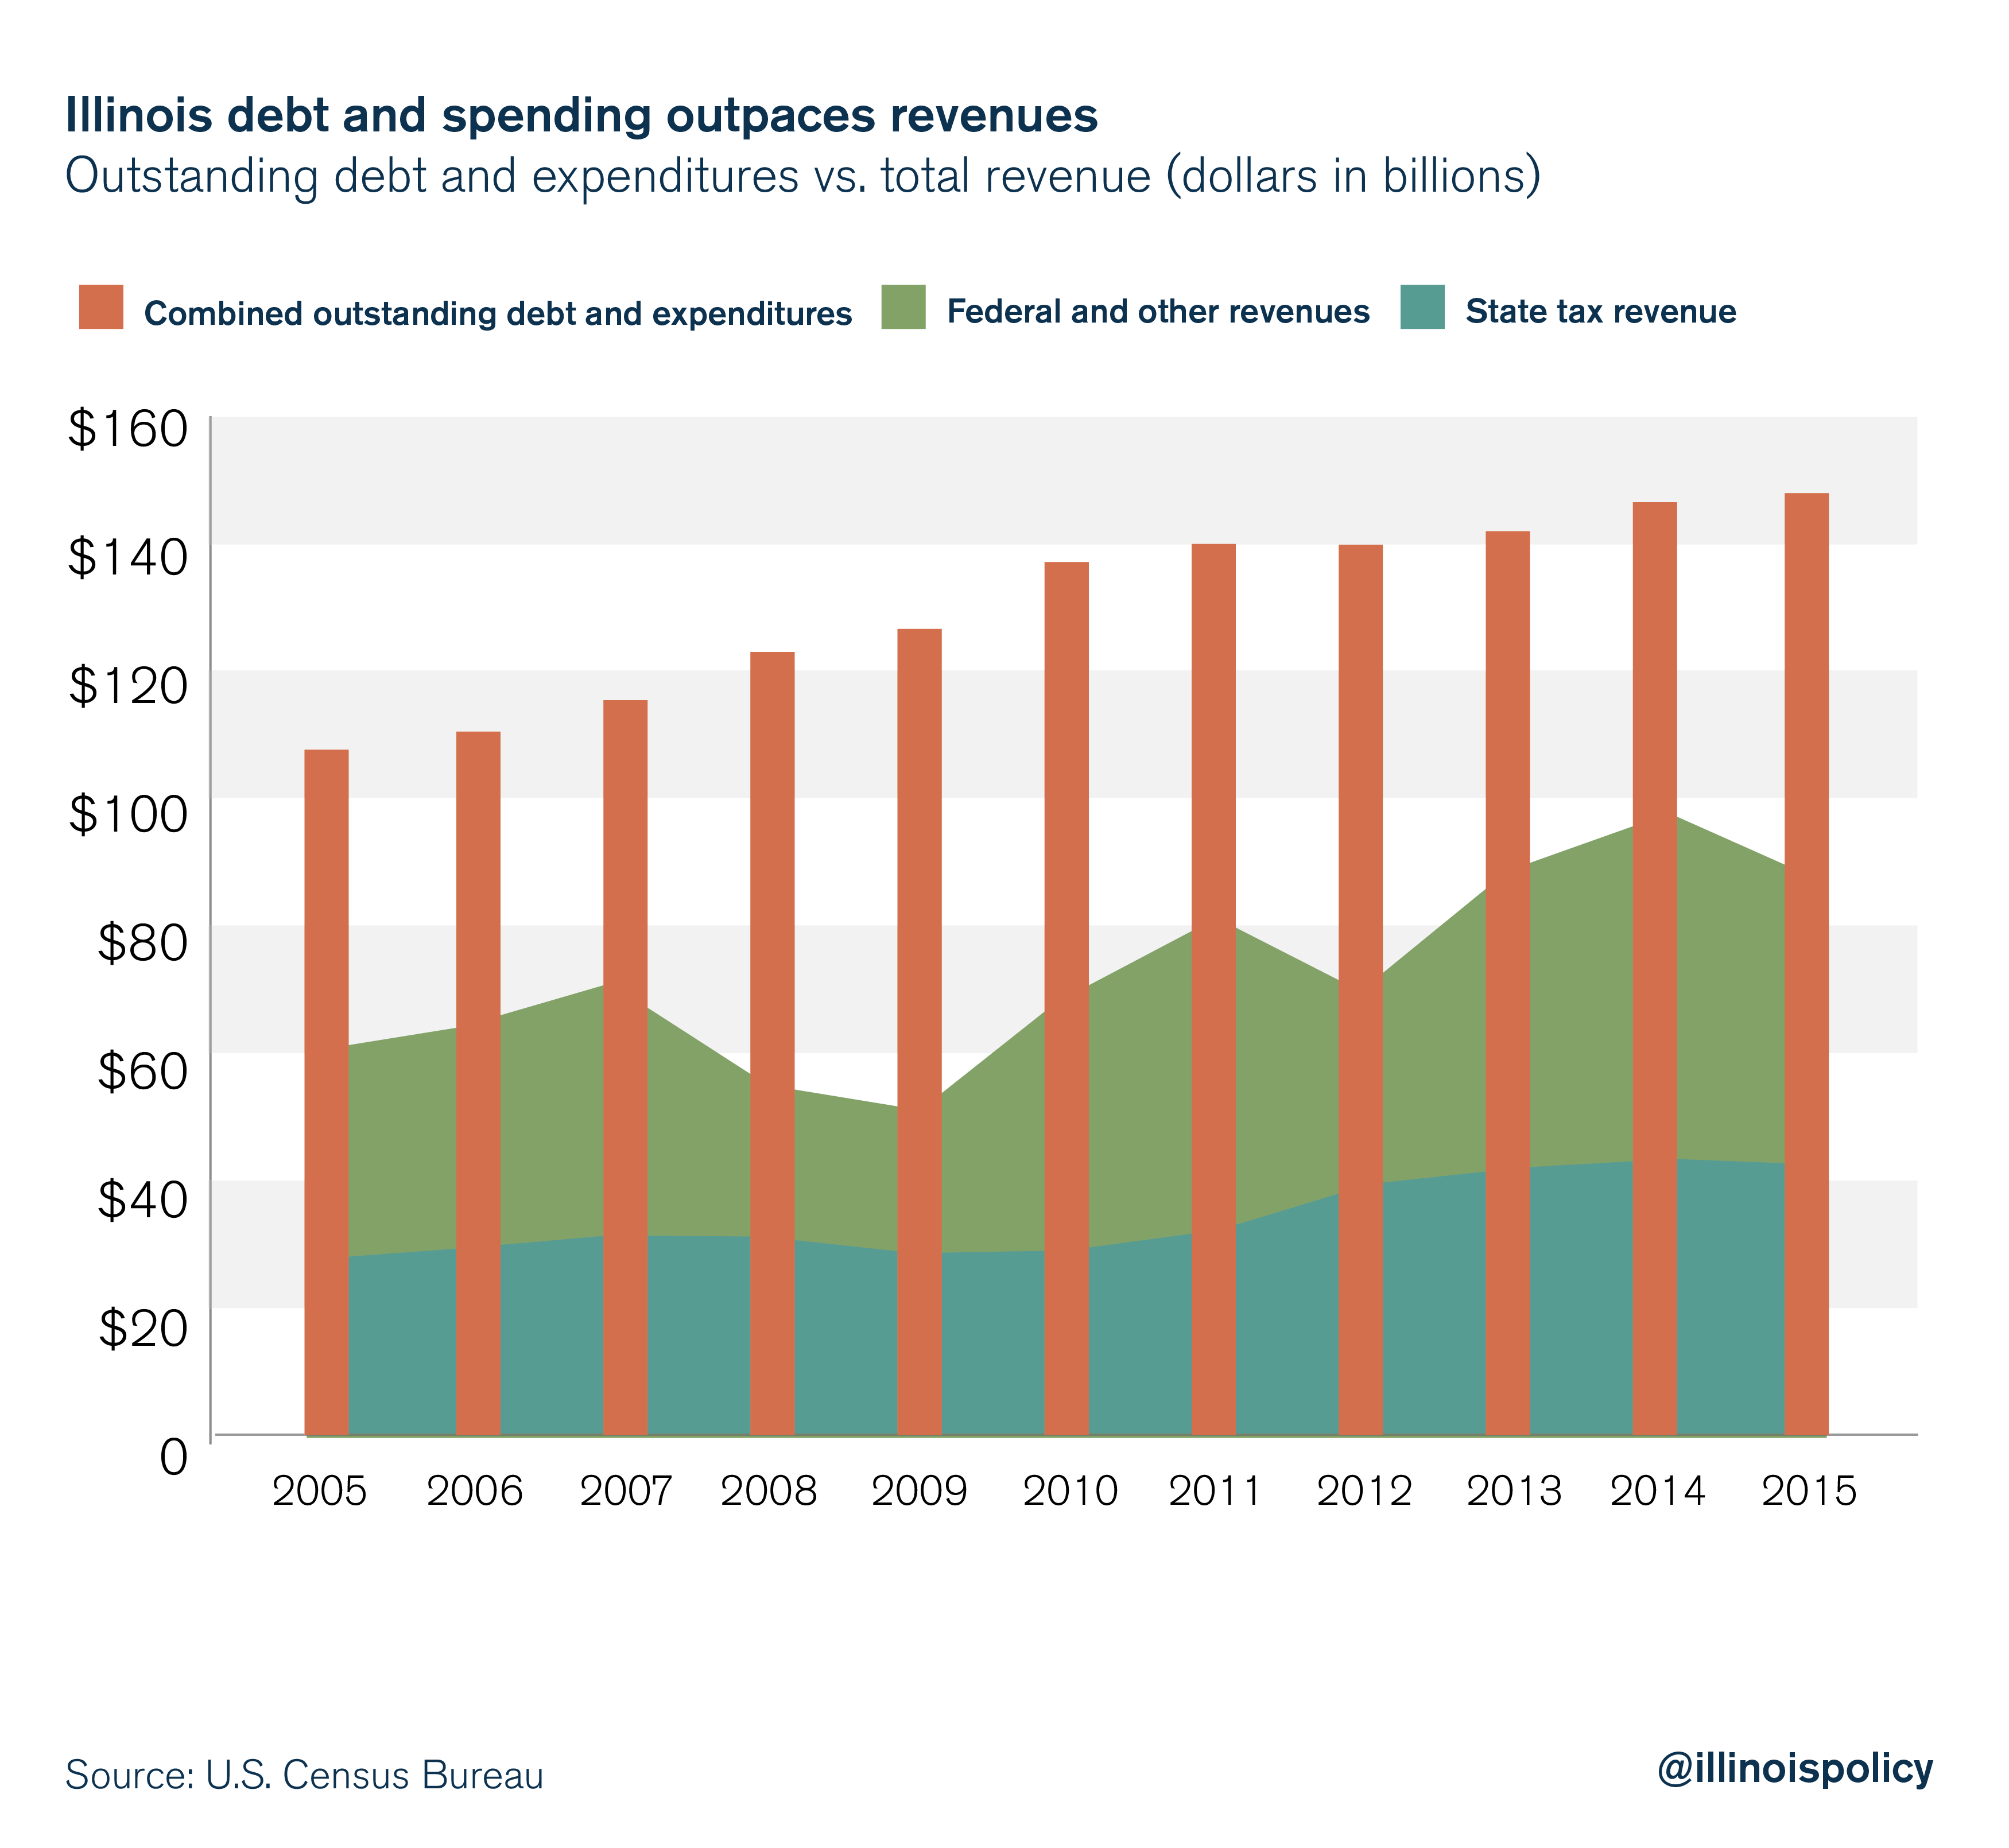 Illinois debt and spending outpaces revenues